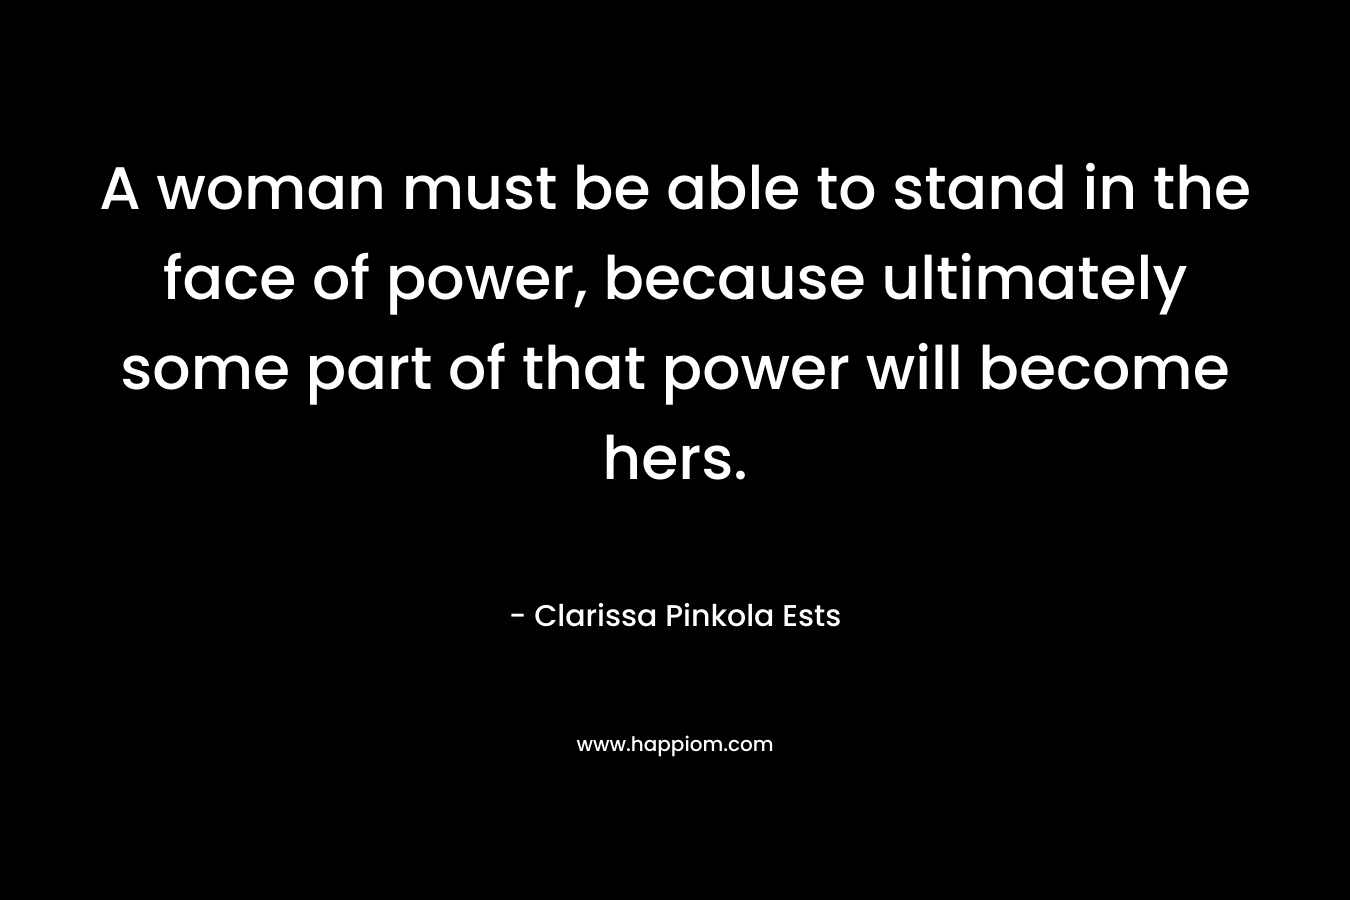 A woman must be able to stand in the face of power, because ultimately some part of that power will become hers. – Clarissa Pinkola Ests